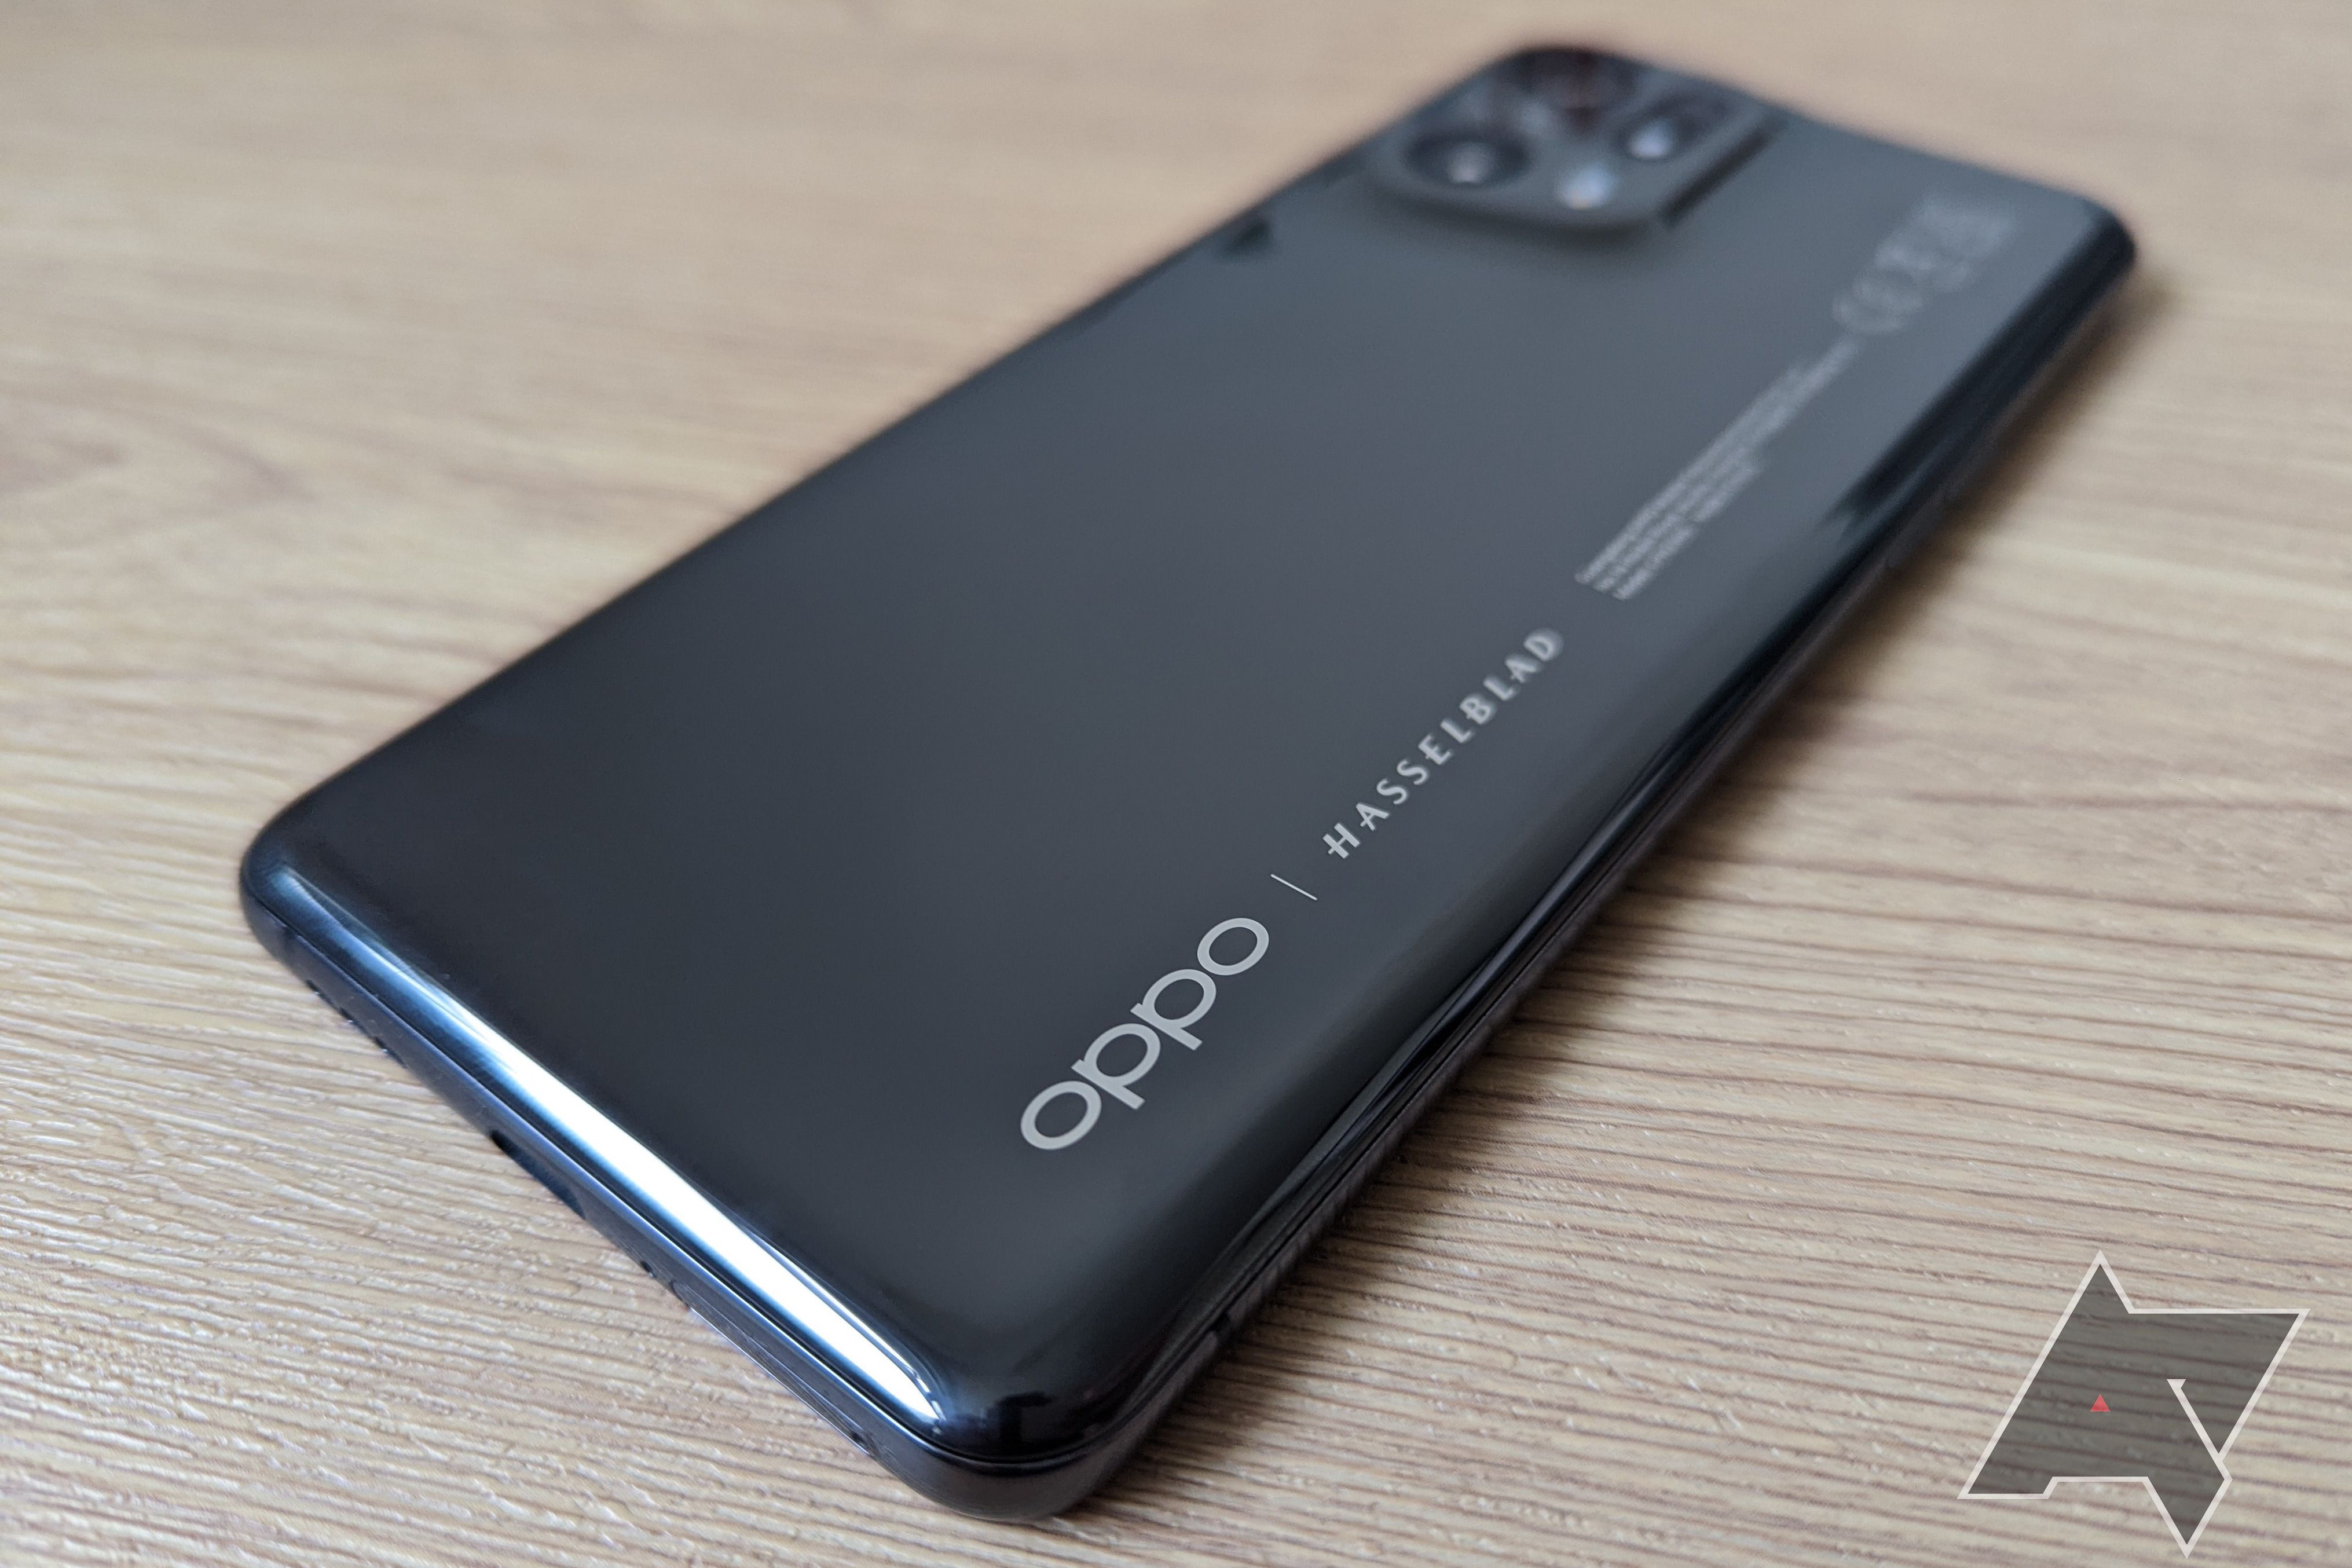 Oppo Find X5 Pro Genuine The ather Case - Dealy